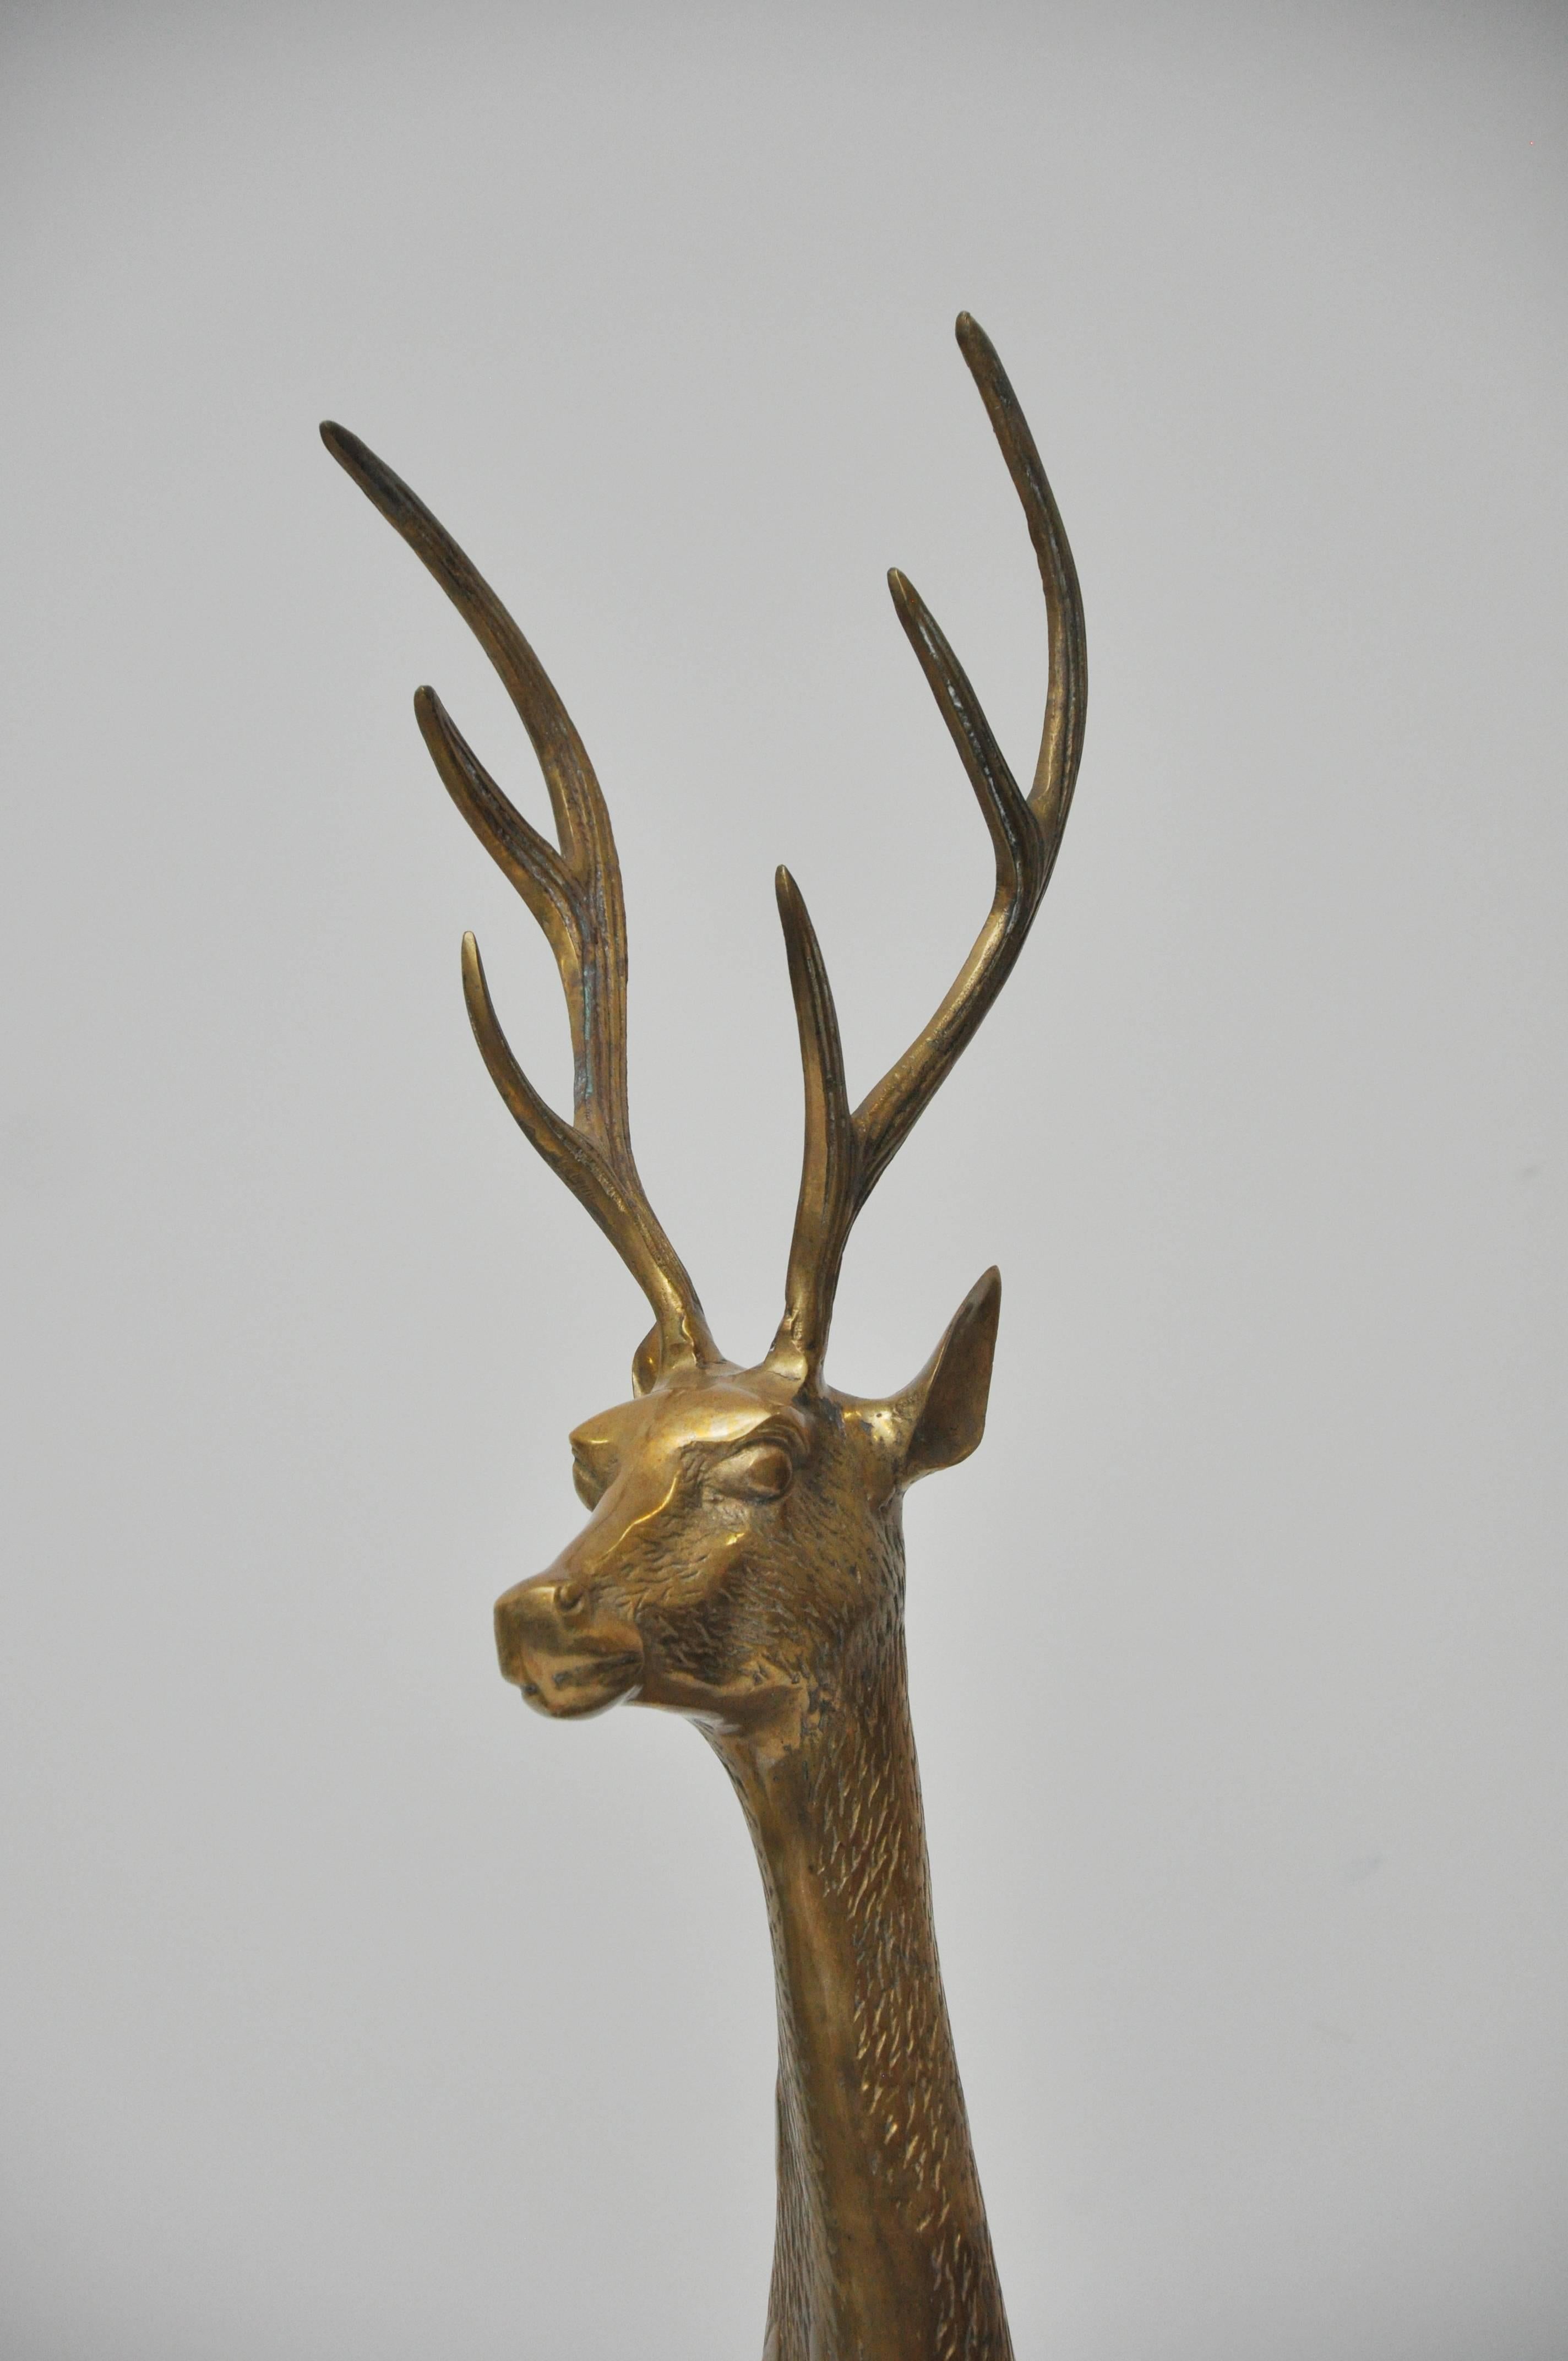 Very large Mid-Century brass deer, set of three including buck, doe, and fawn. The brass figures have detailing of the fur. Beautiful patina. Measures: Buck stands 50